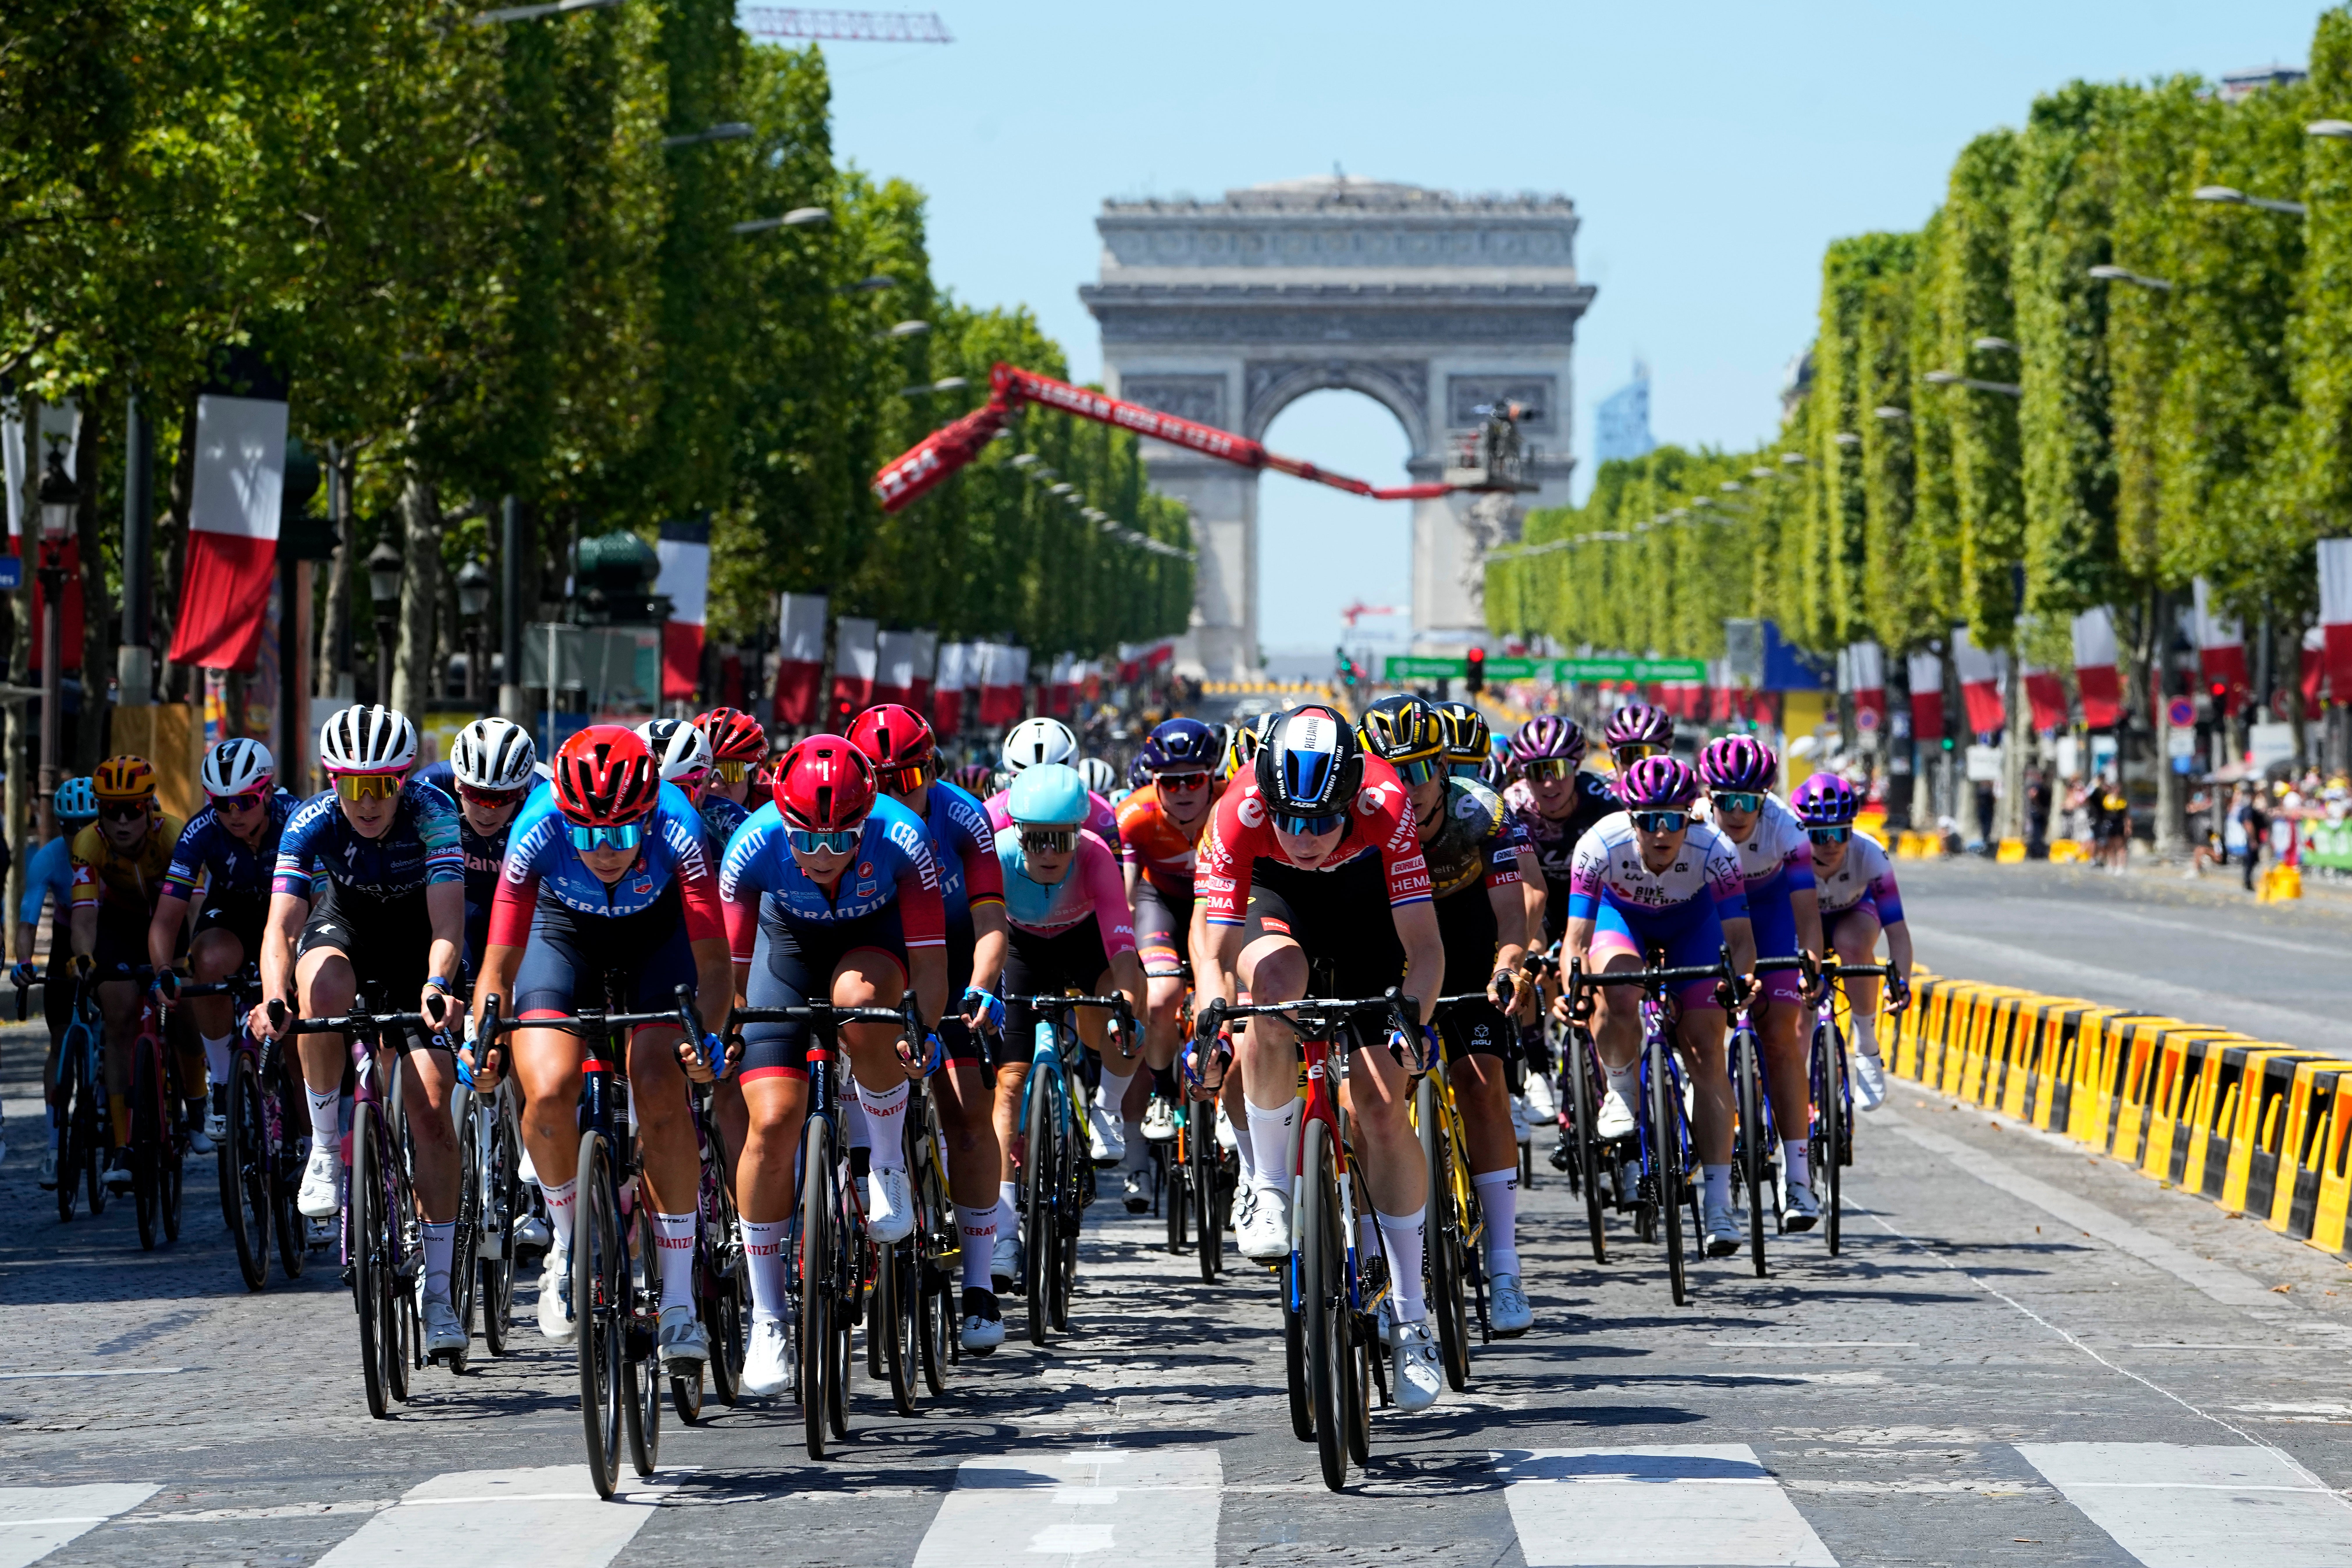 The pack speeds down the Champs Elysee